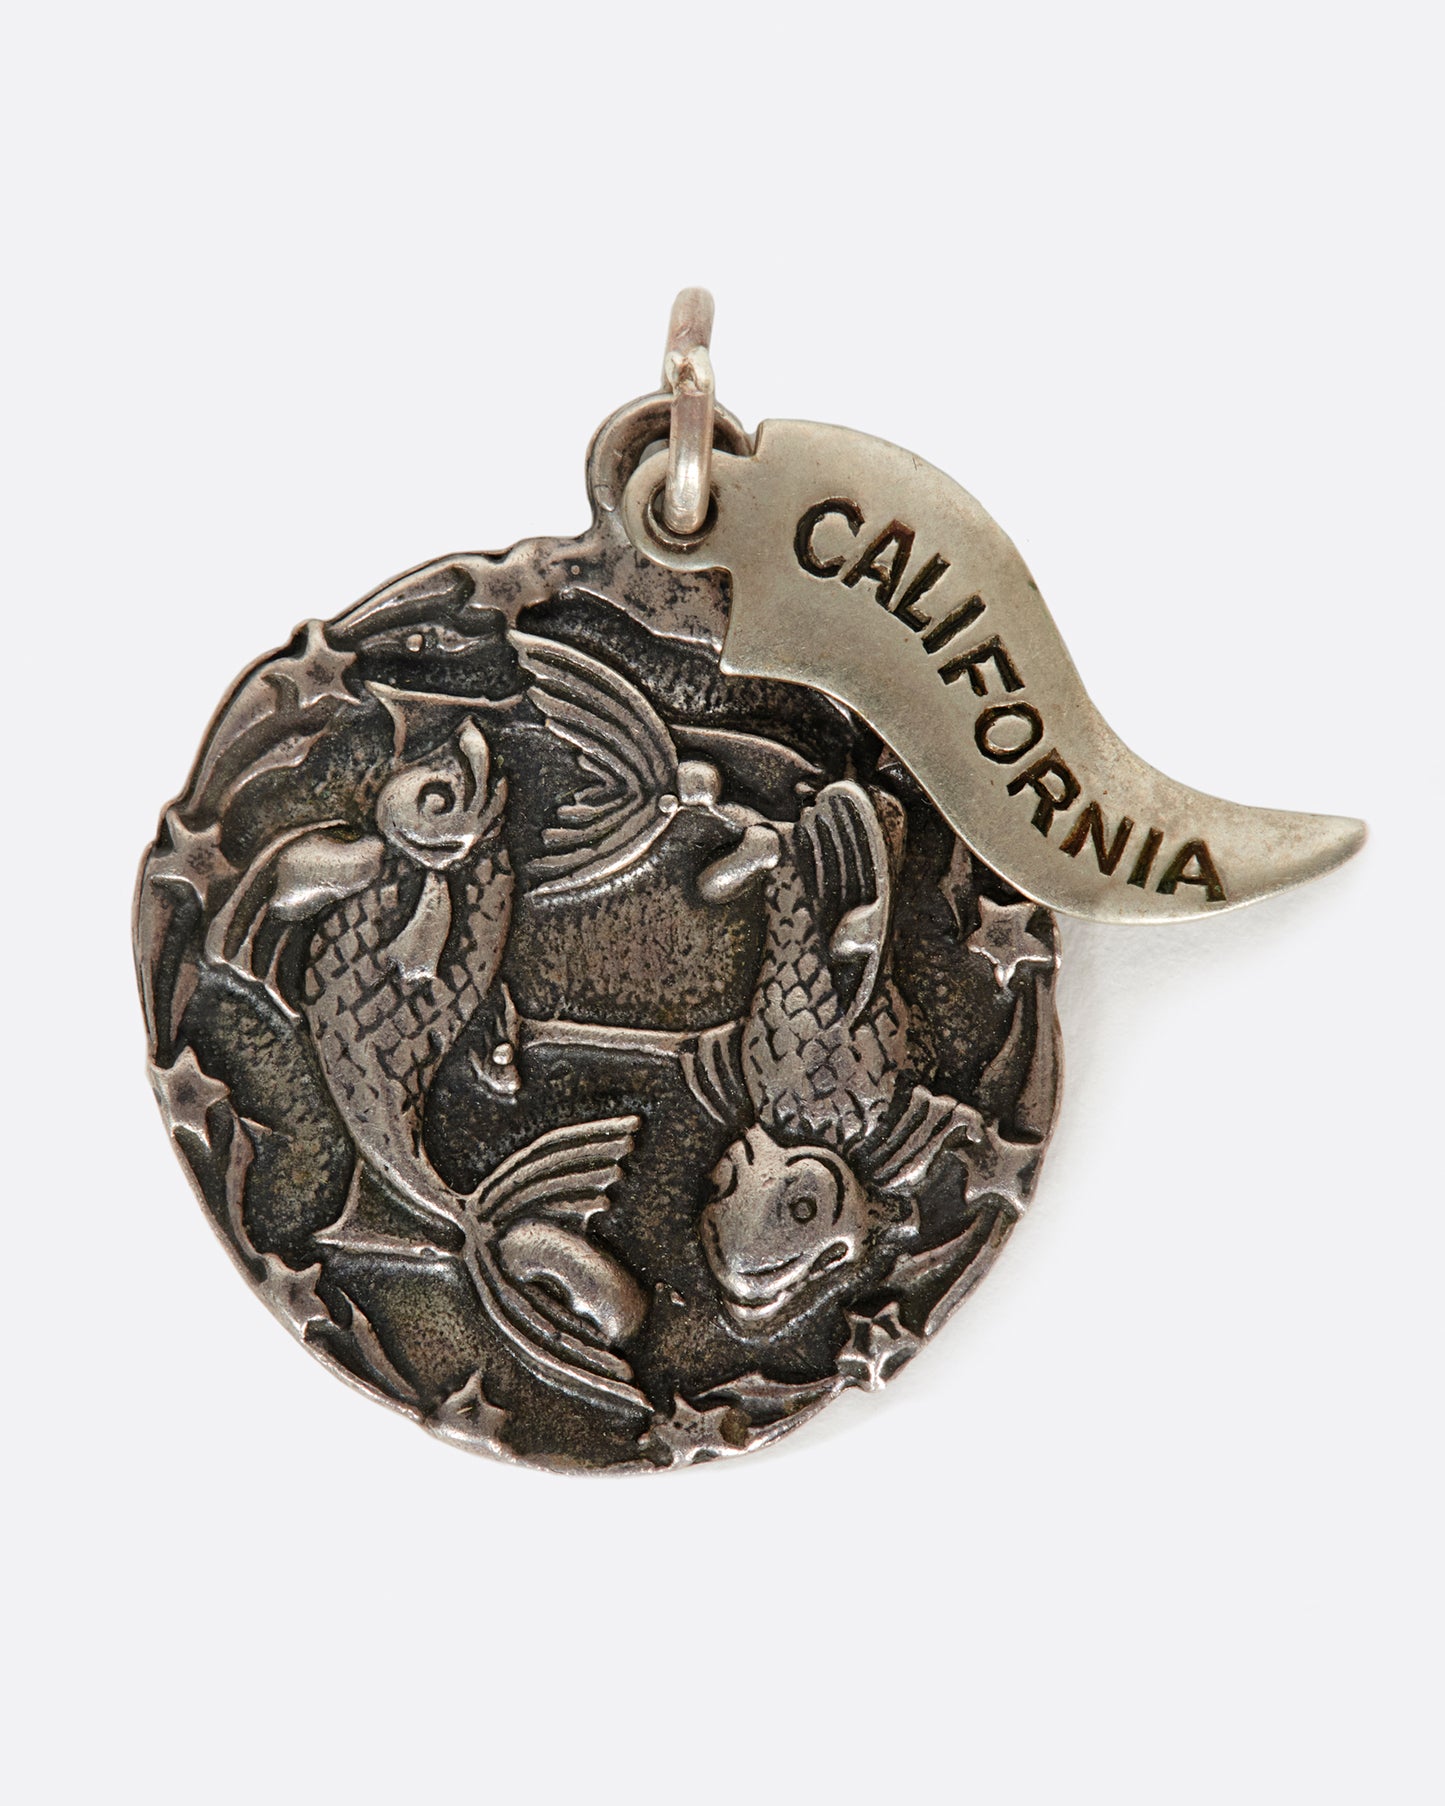 A round medal pendant with your zodiac sign and a California pennant.